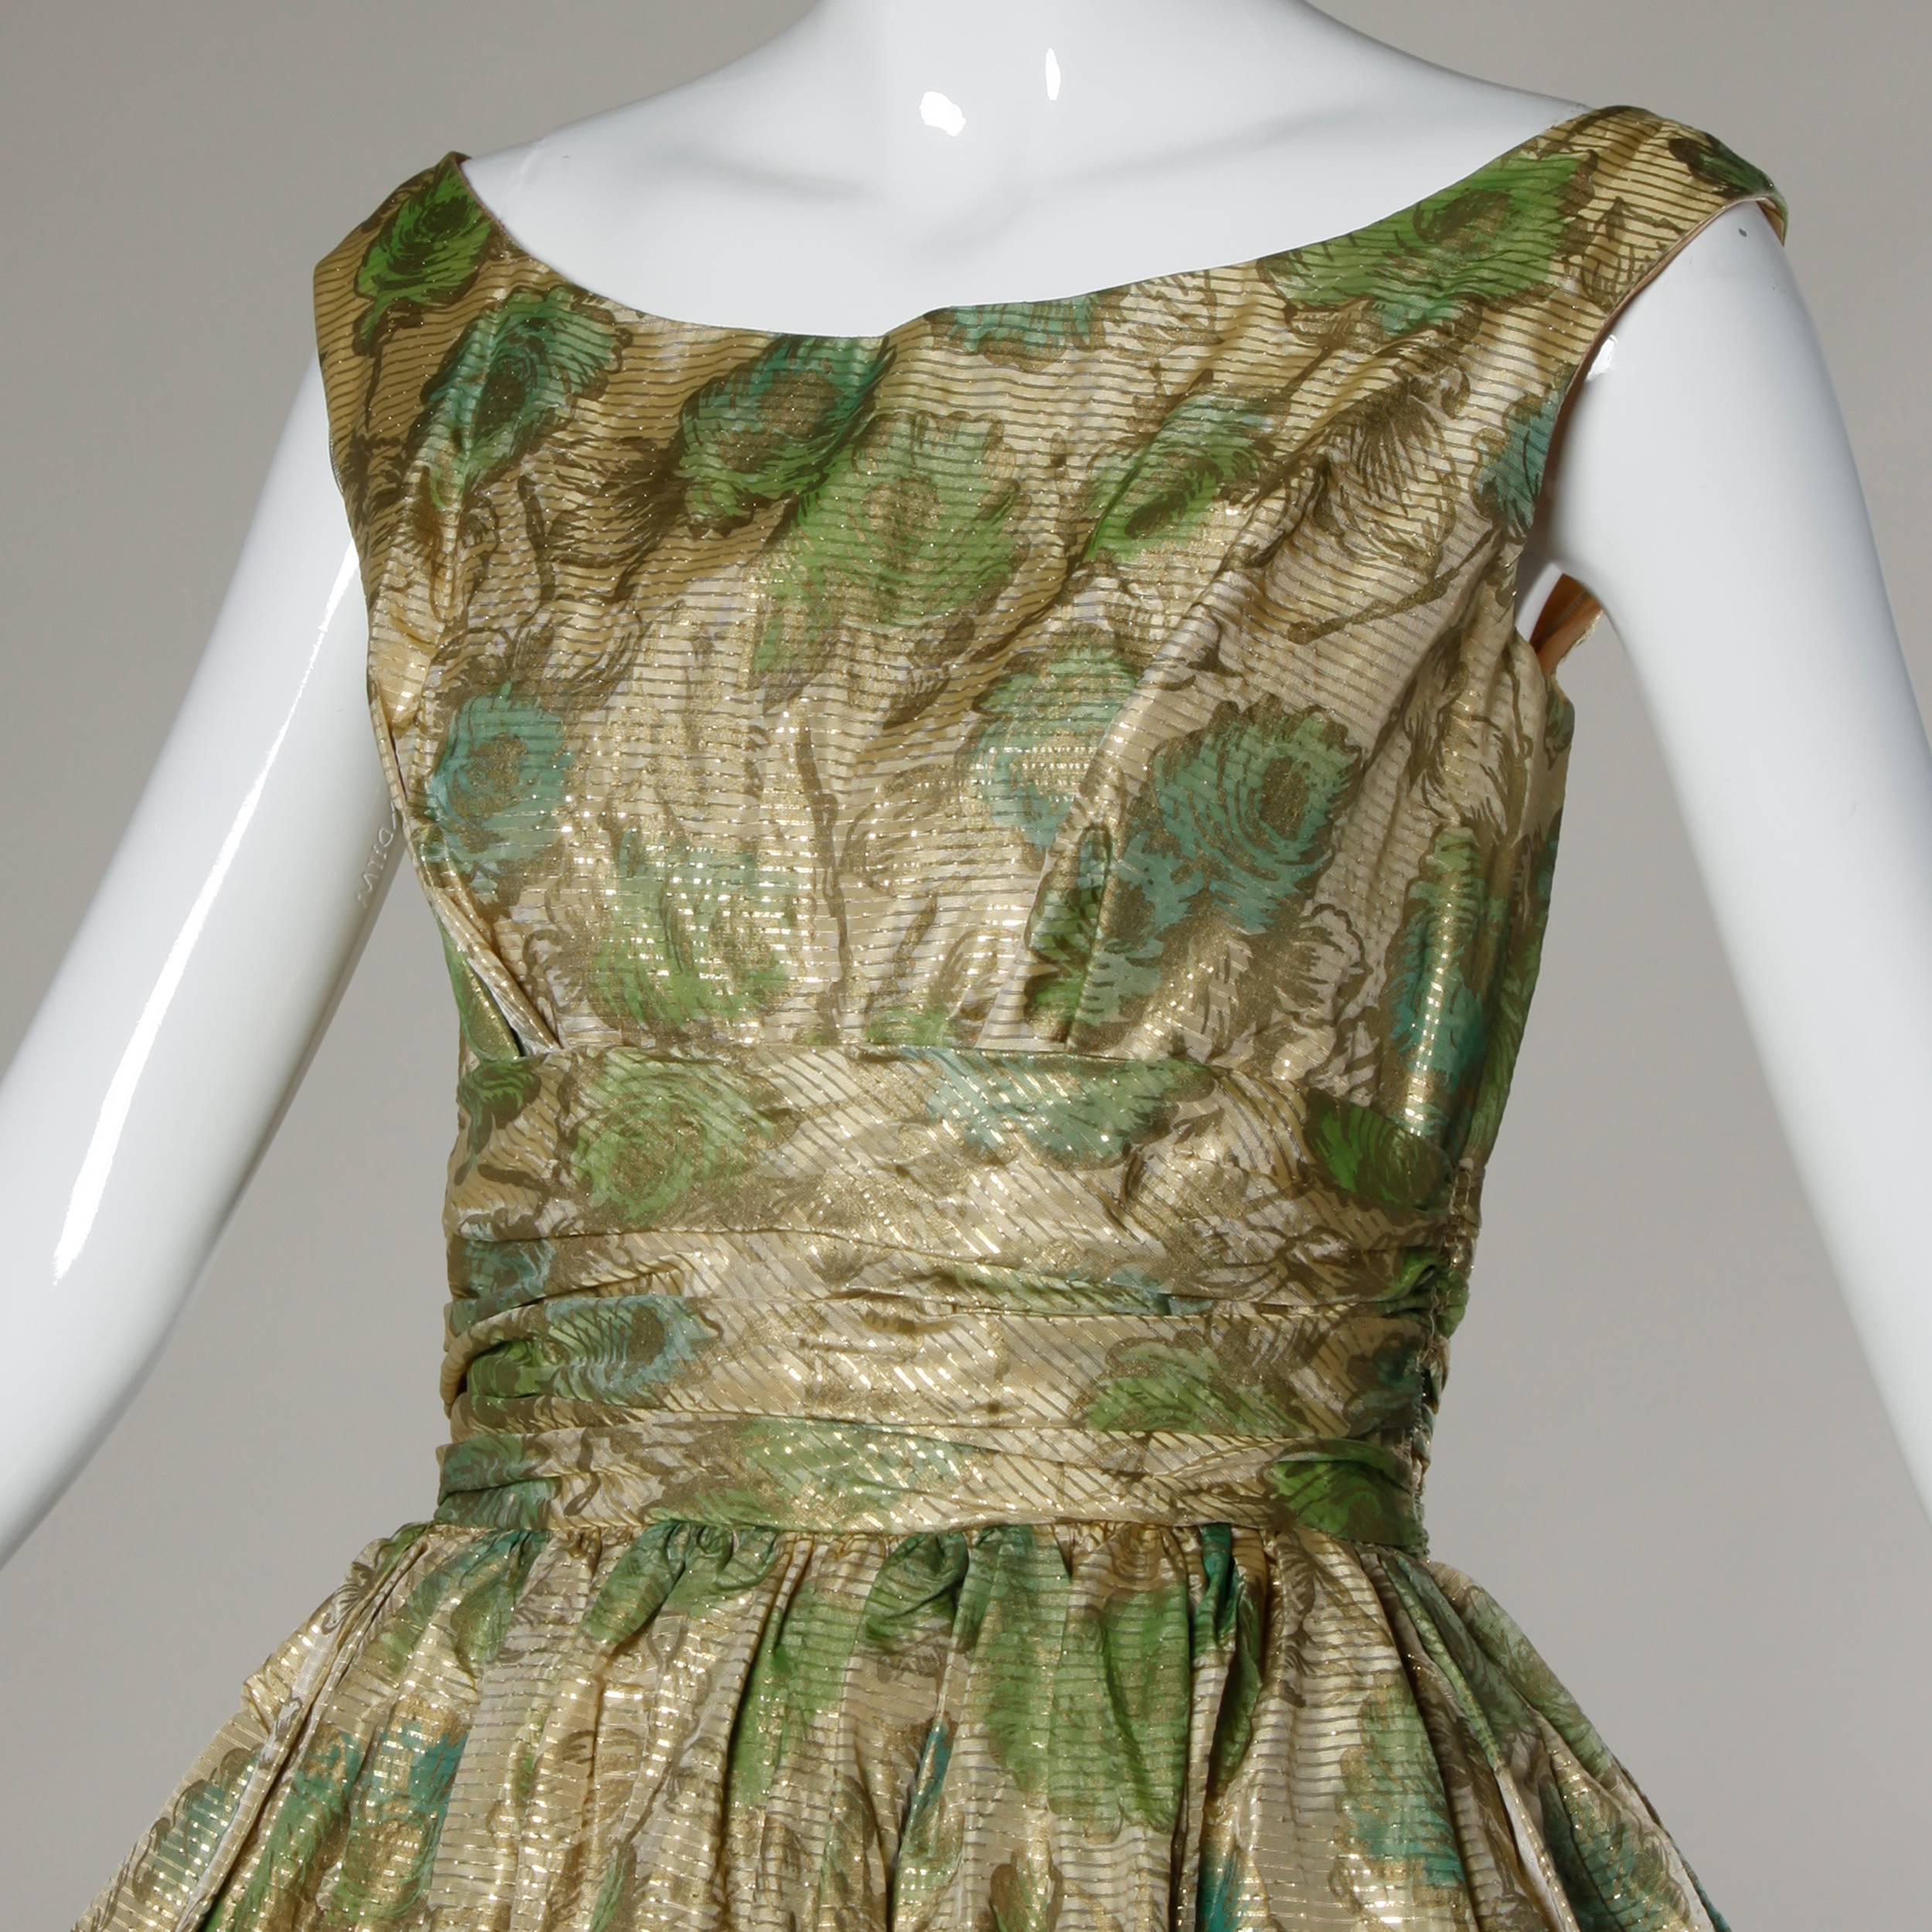 Unworn with the original tags still attached! Vintage 1950s cocktail dress in a metallic floral print. Bubble hem with built in crinoline adds extra volume to the skirt of the dress.

Details:

Fully Lined
Back Metal Zip and Hook